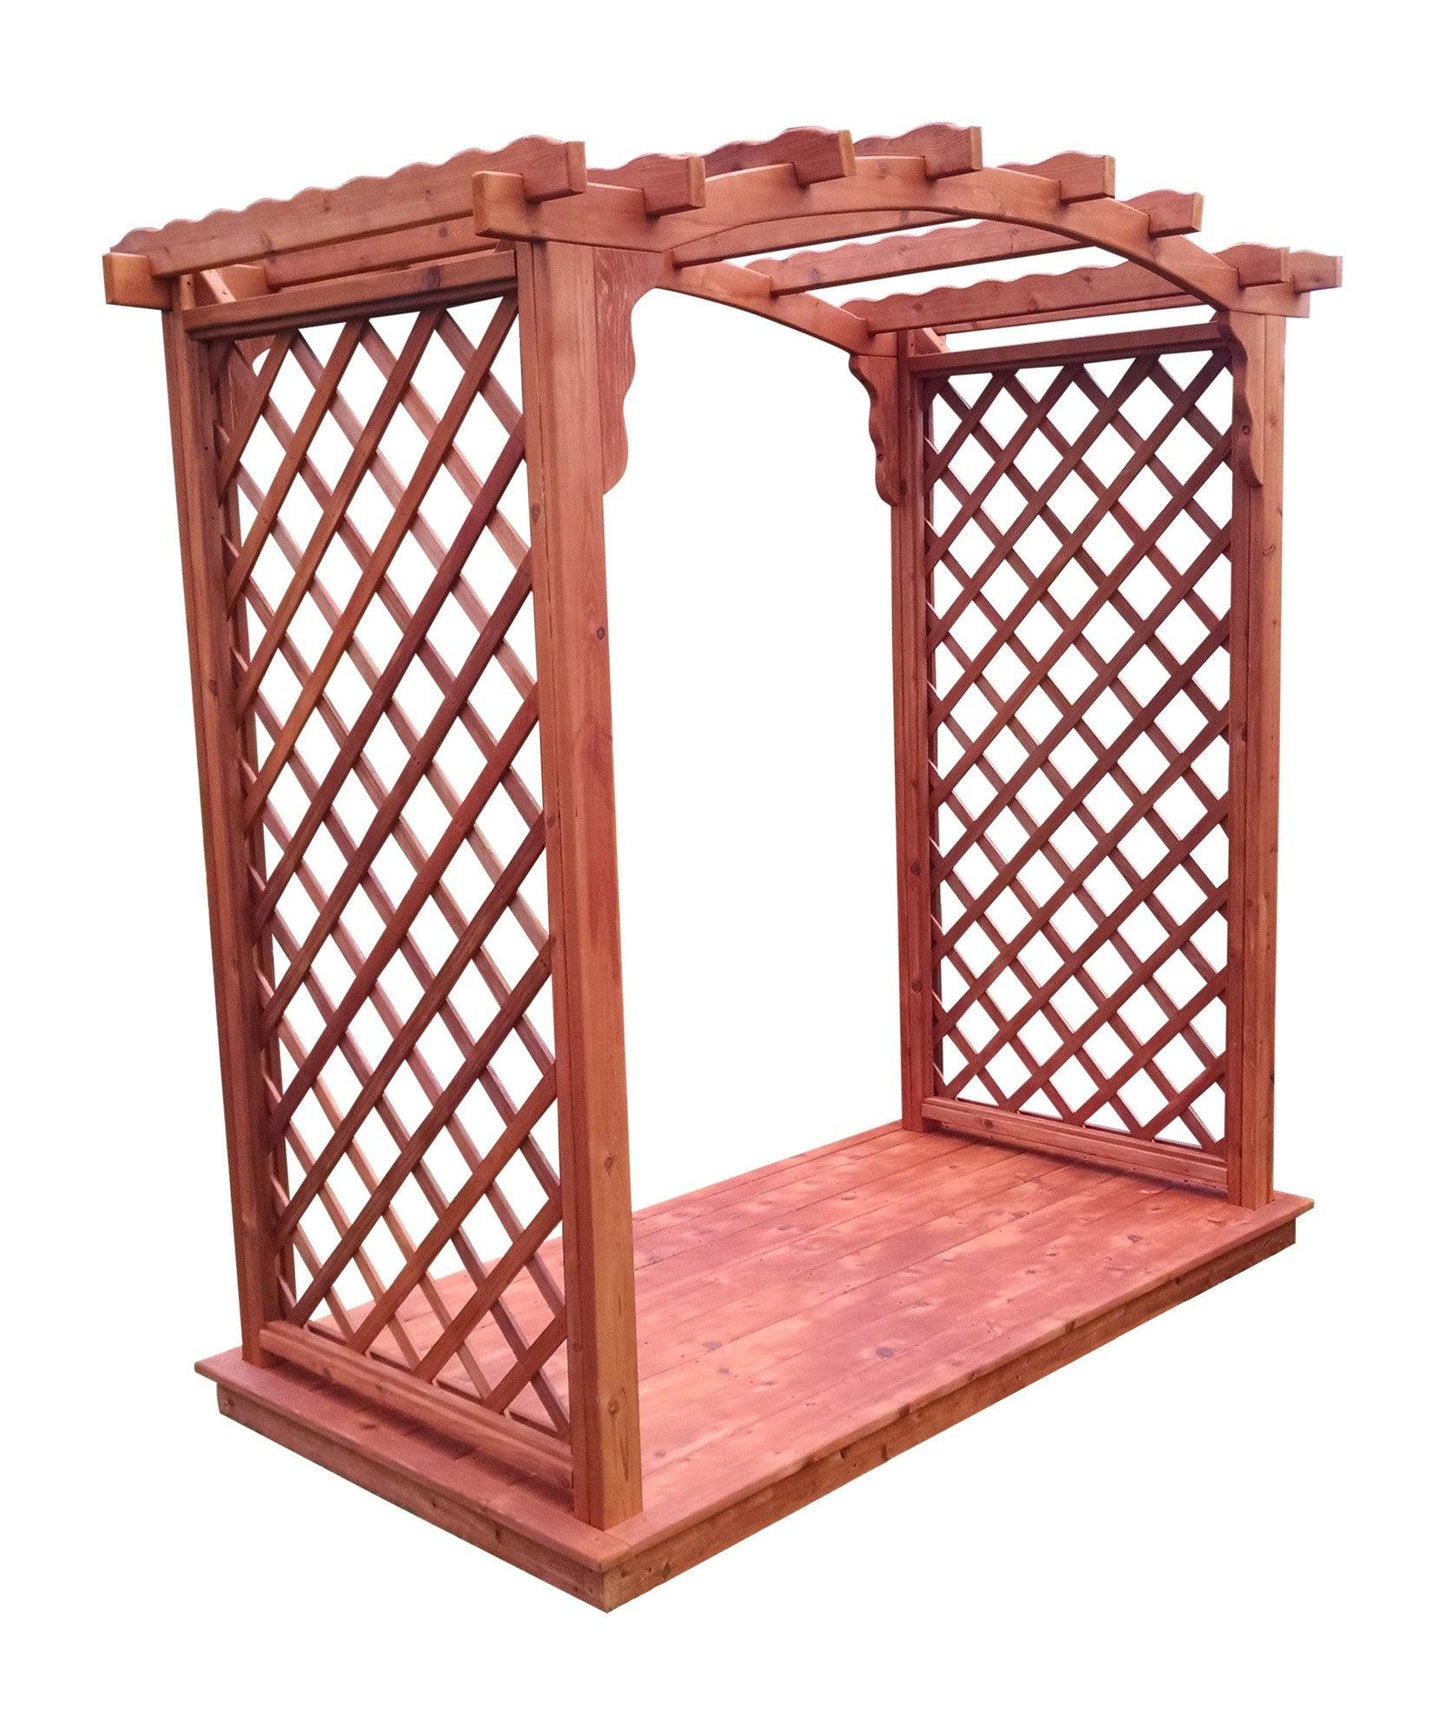 A&L Furniture Co. Western Red Cedar 4' Jamesport Arbor & Deck - LEAD TIME TO SHIP 4 WEEKS OR LESS